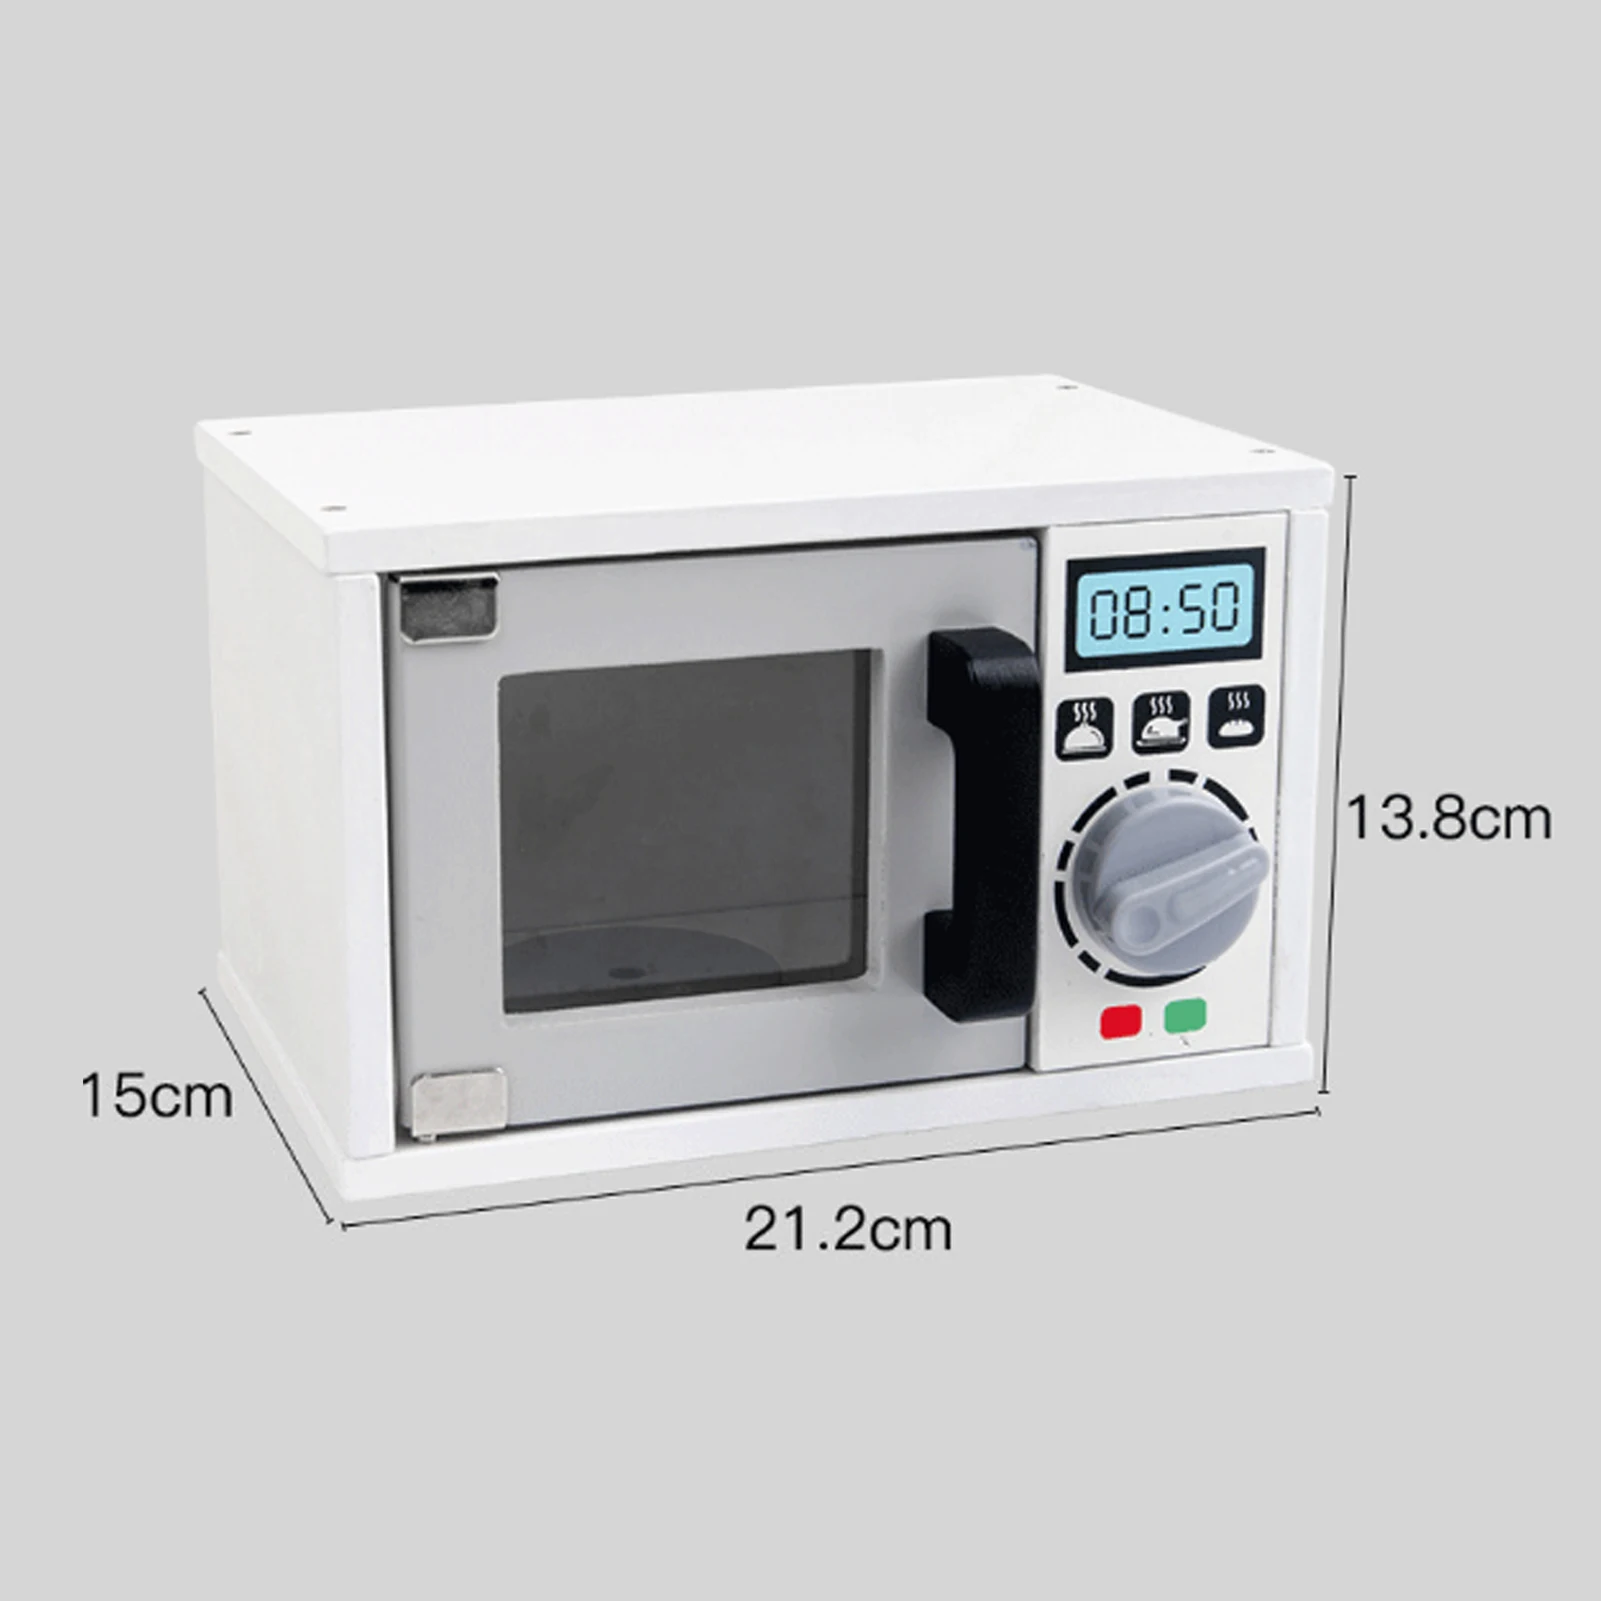 Kid's Kitchen Toys Simulation Microwave Oven Educational Toys Mini Kitchen  Food Pretend Play Cutting Role Playing Girls Toys - Kitchen Toys -  AliExpress